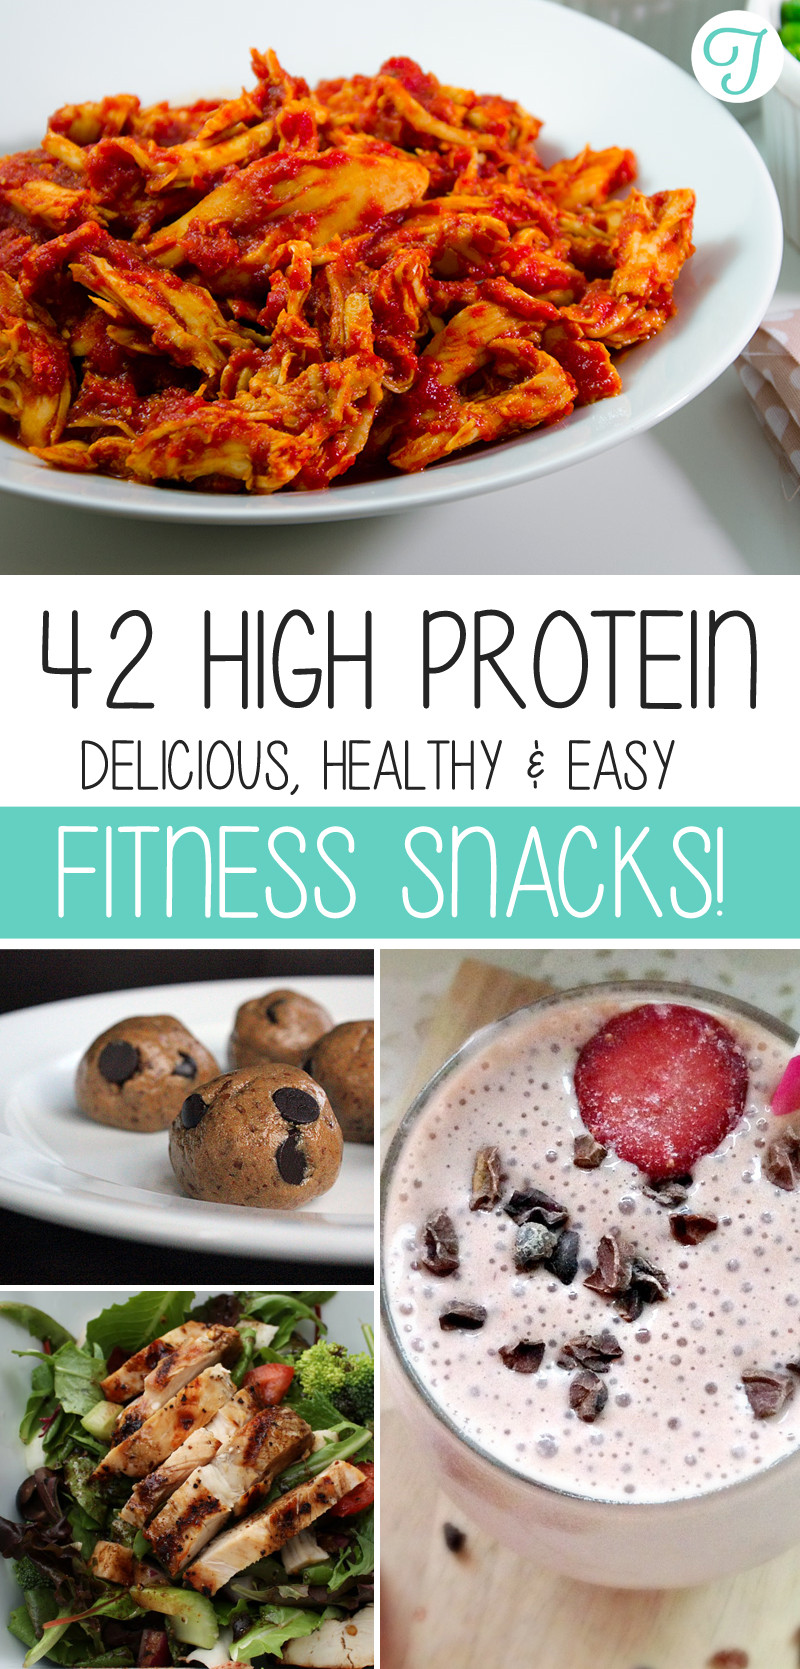 Healthy Snacks High In Protein
 42 Delicious High Protein Snacks You Must Try